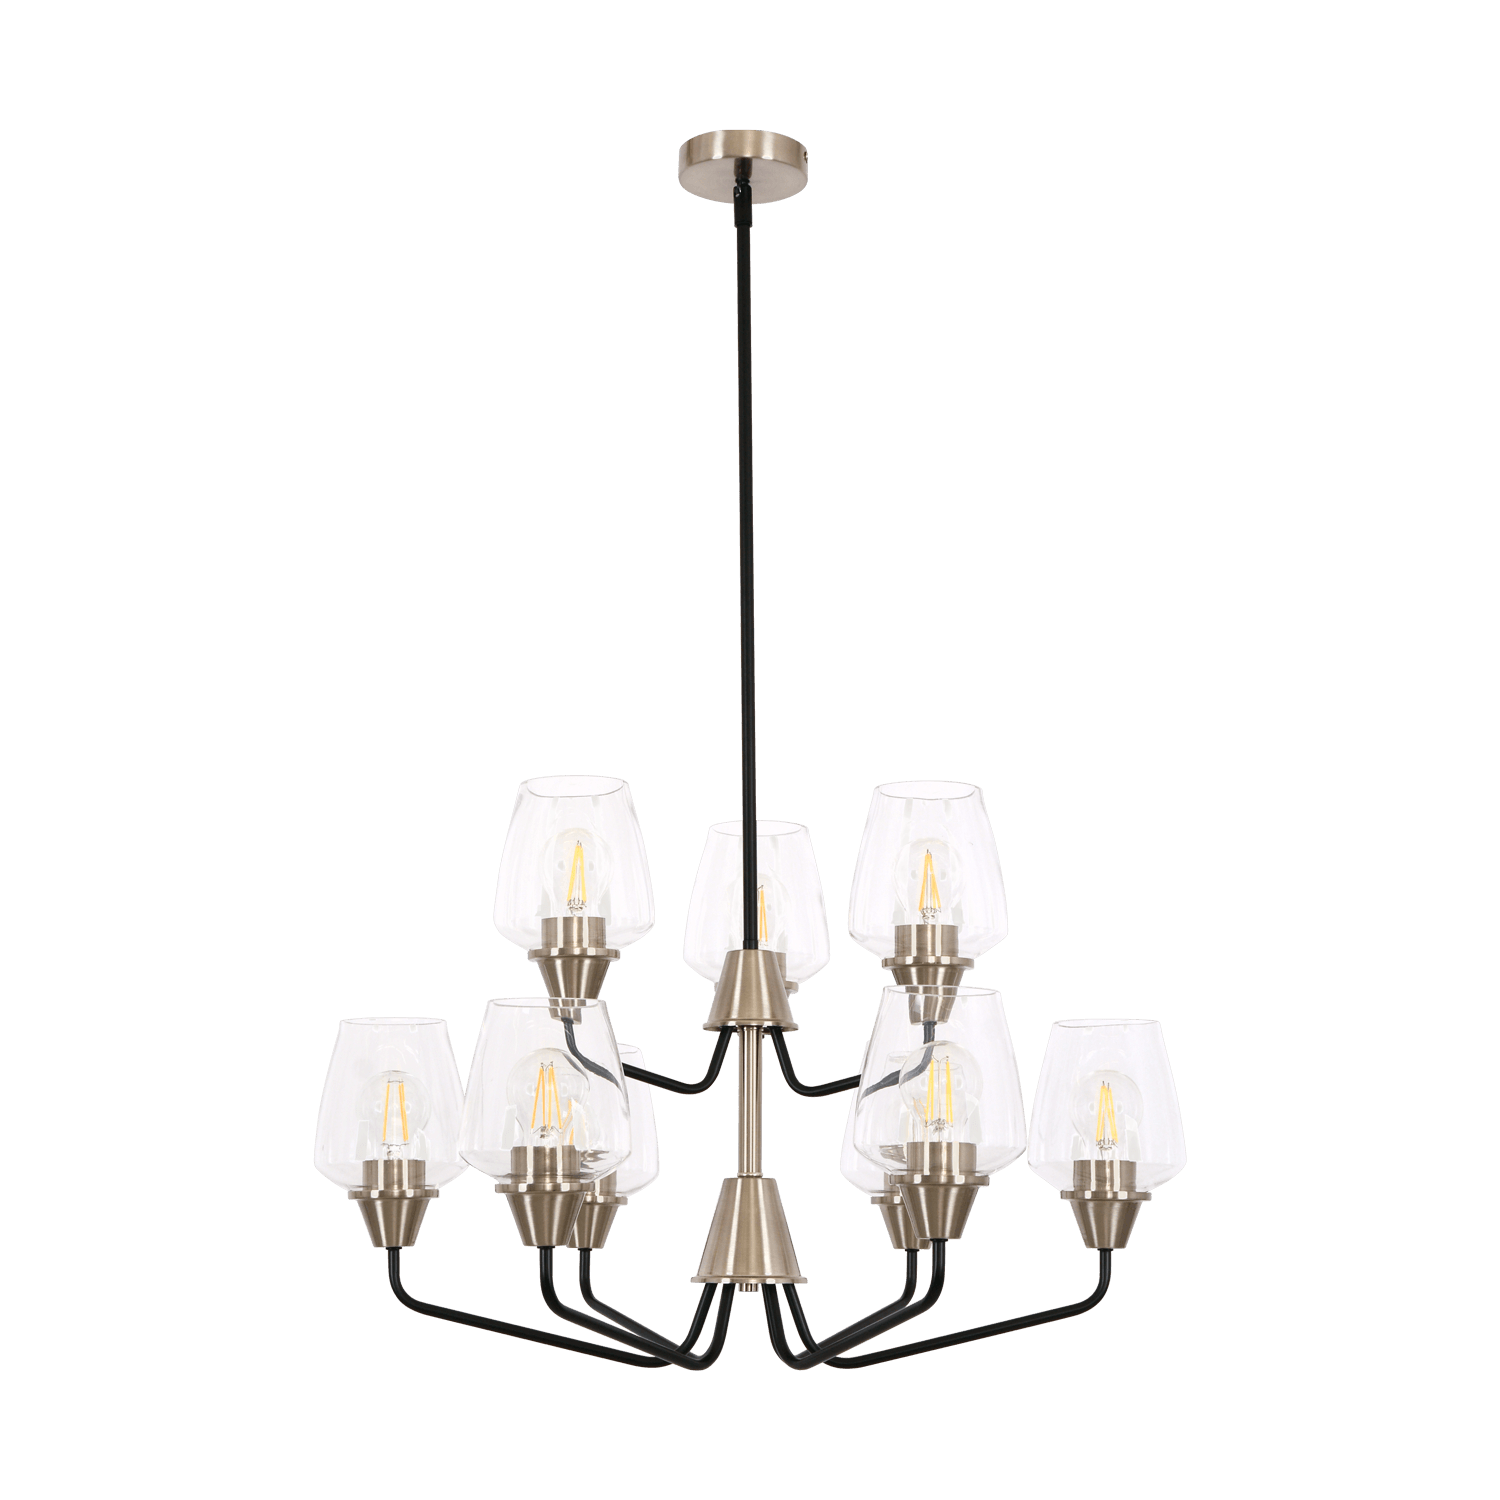 9 Light Black and Satin Nickel Chandelier with Clear Glass